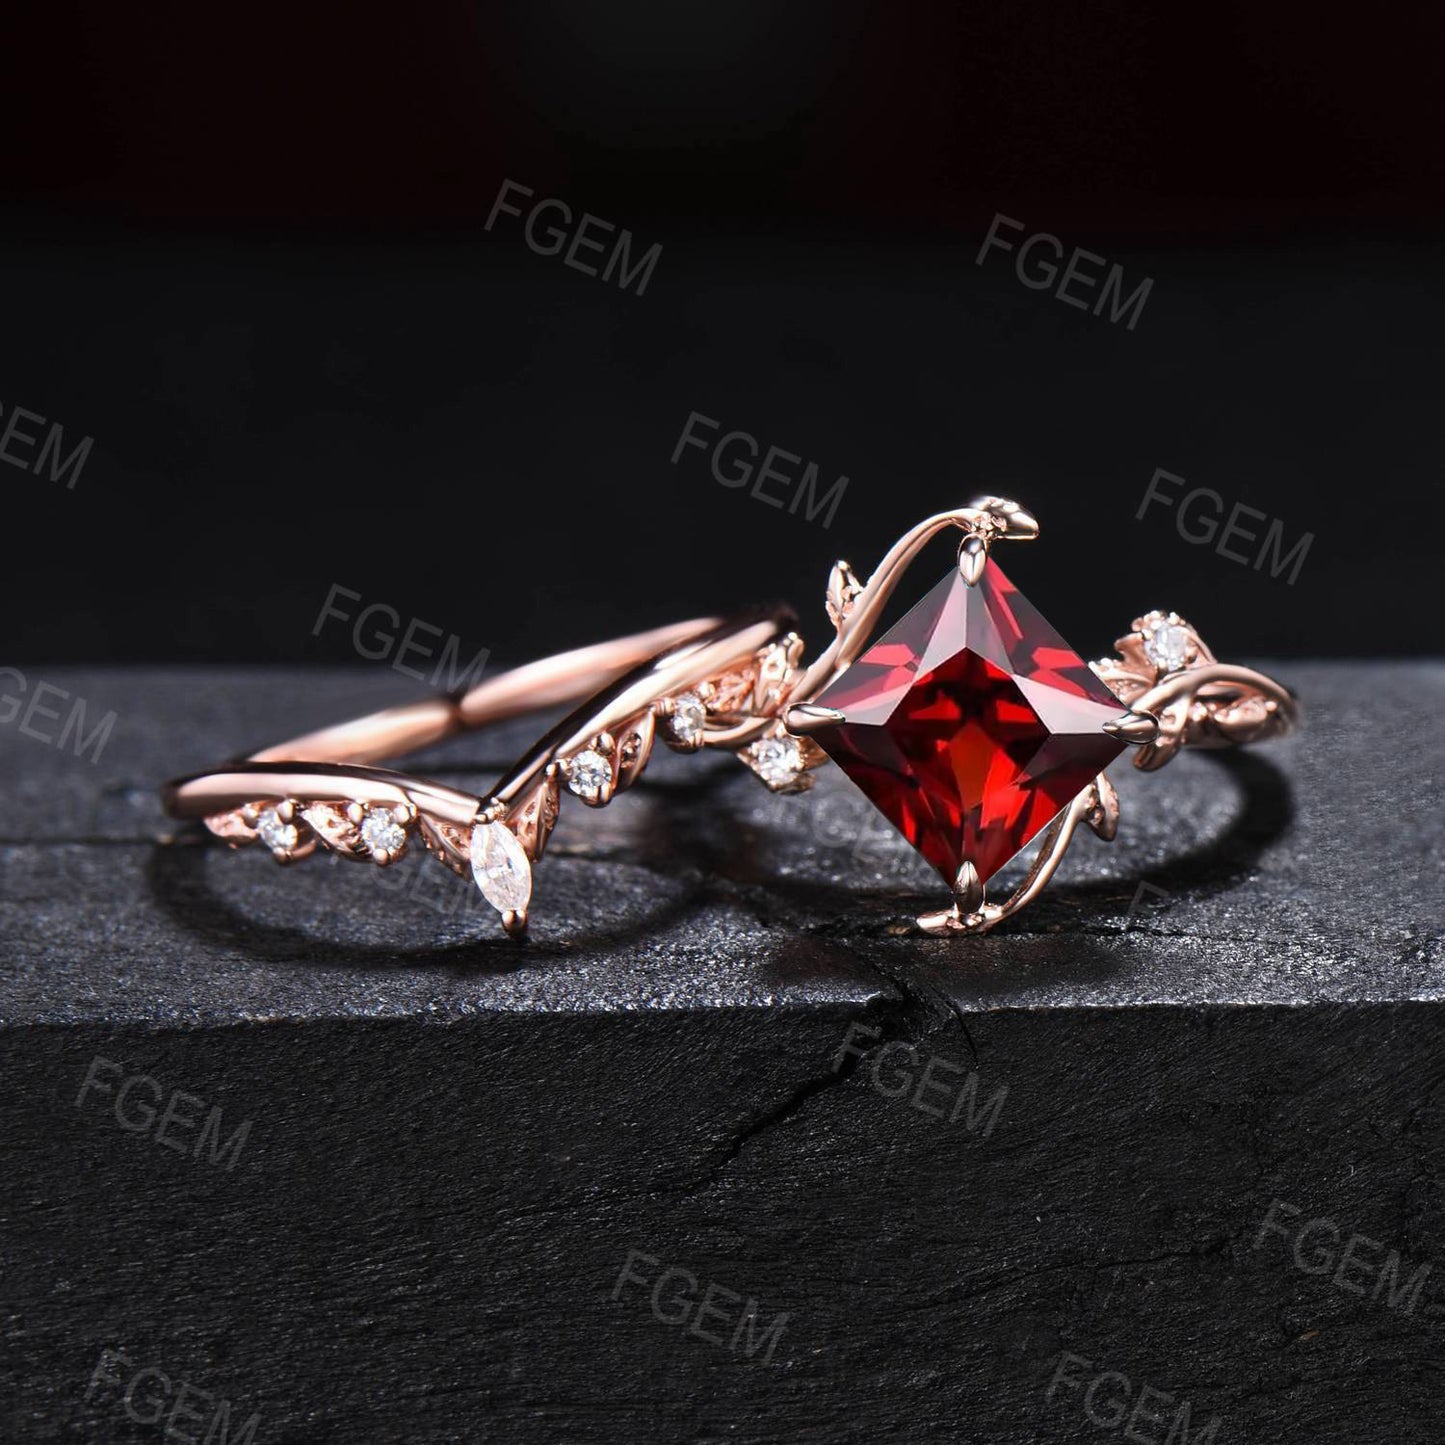 7mm Princess Cut Natural Garnet Diamond Ring Red Gemstone Jewelry Nature Inspired Twig Leaf Garnet Engagement Rings Unique January Birthstone Gifts